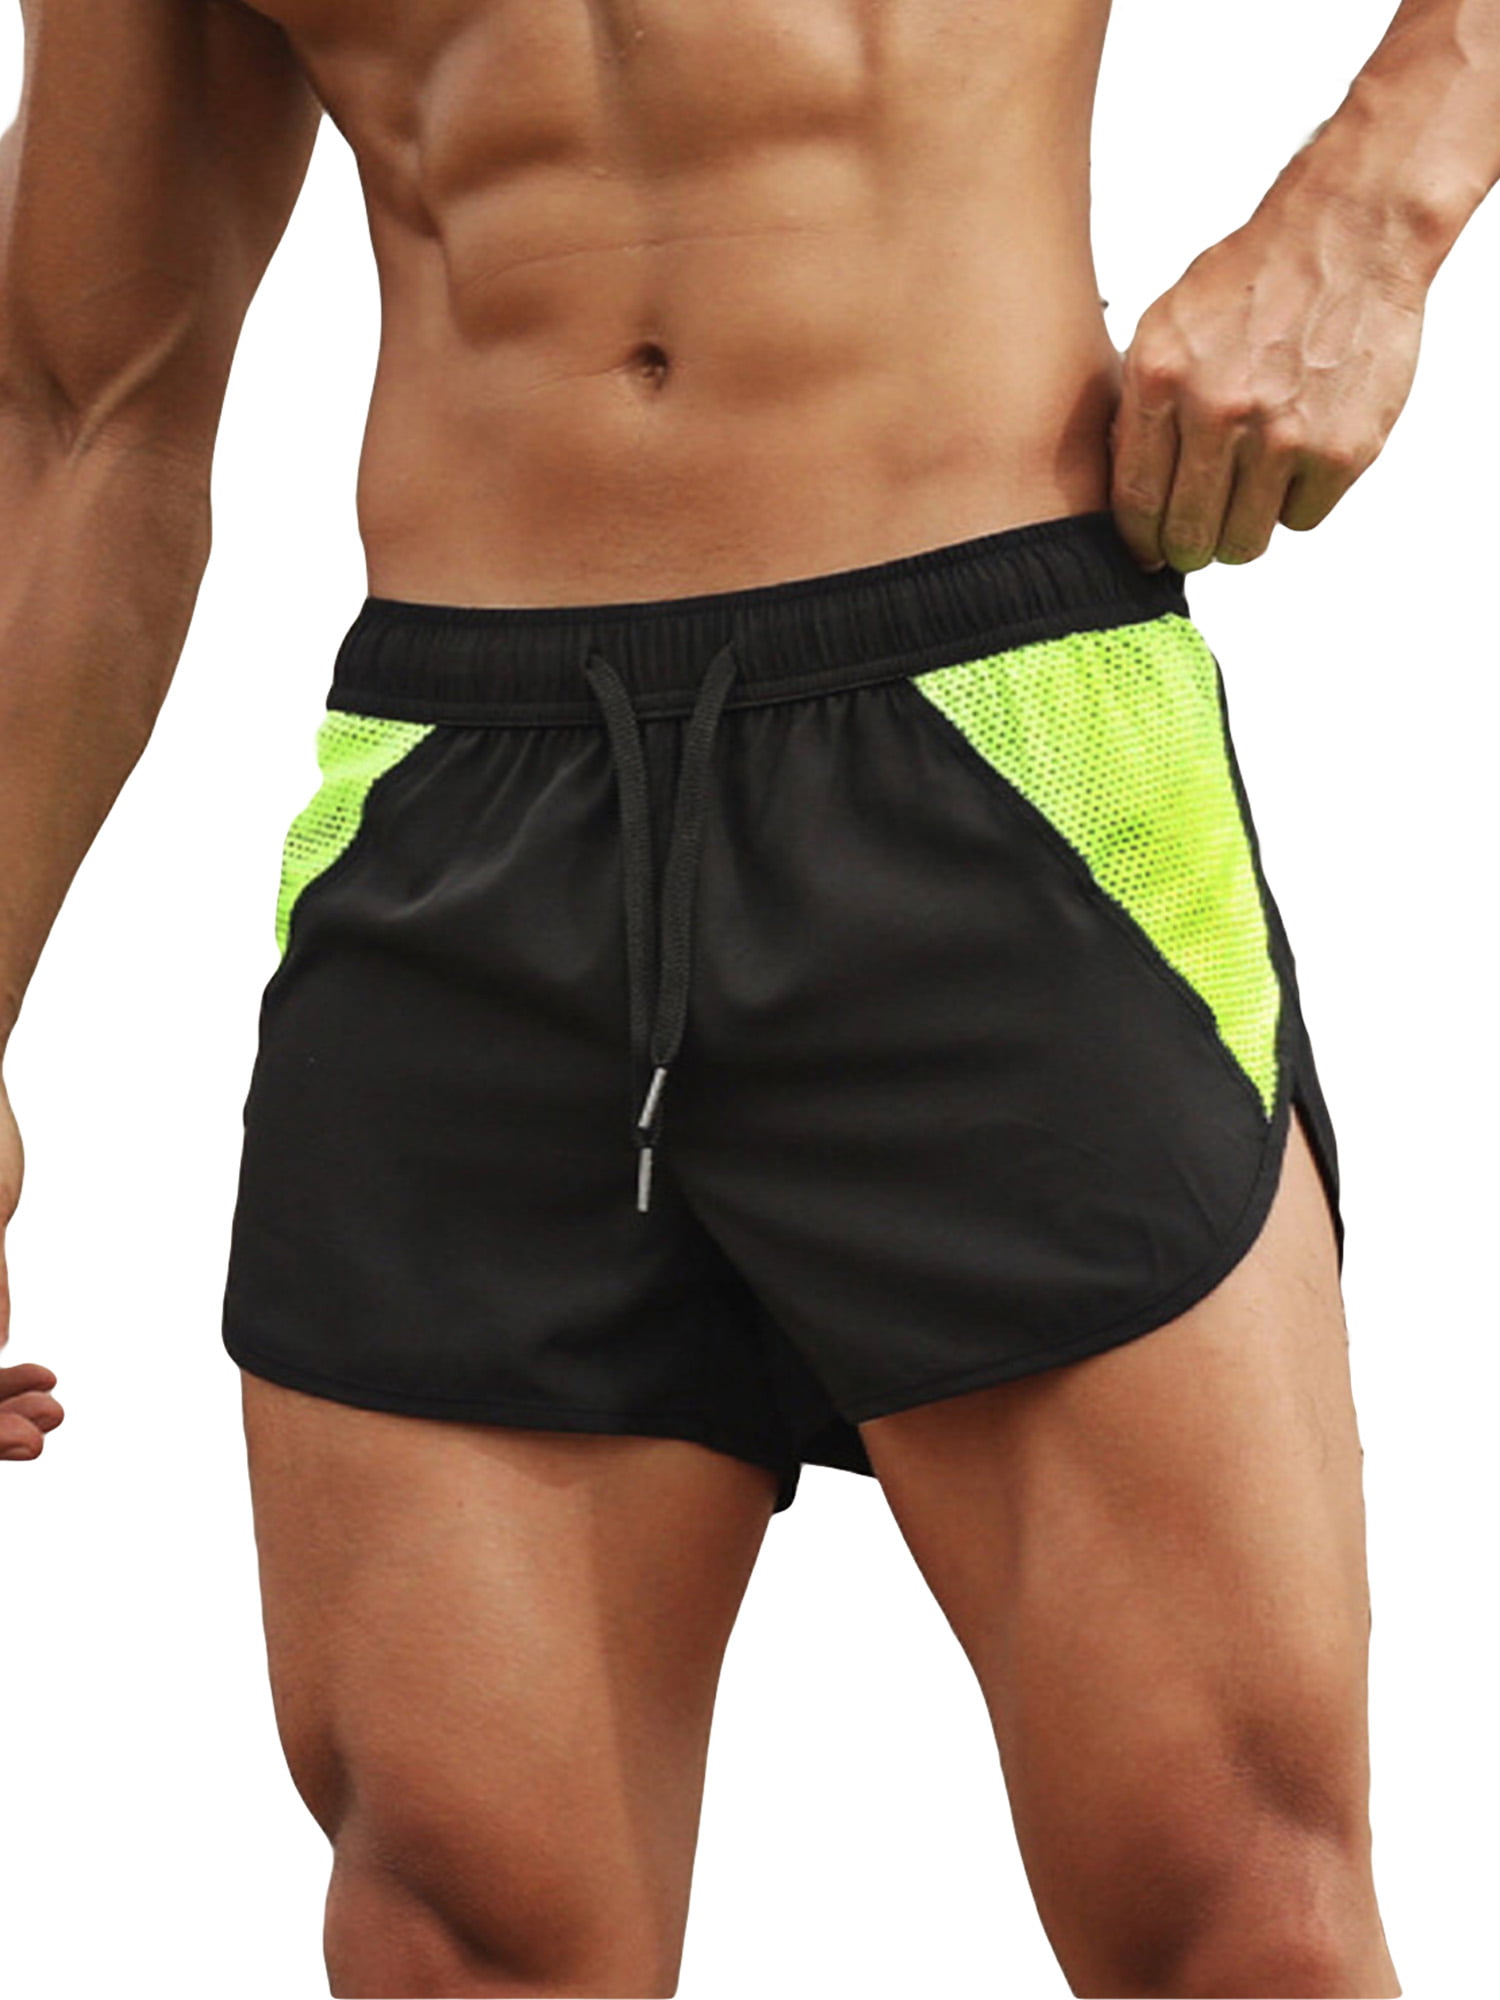 Men's Active Running/Gym/Athletics/Workout Shorts with Liner & Zip Pocket 